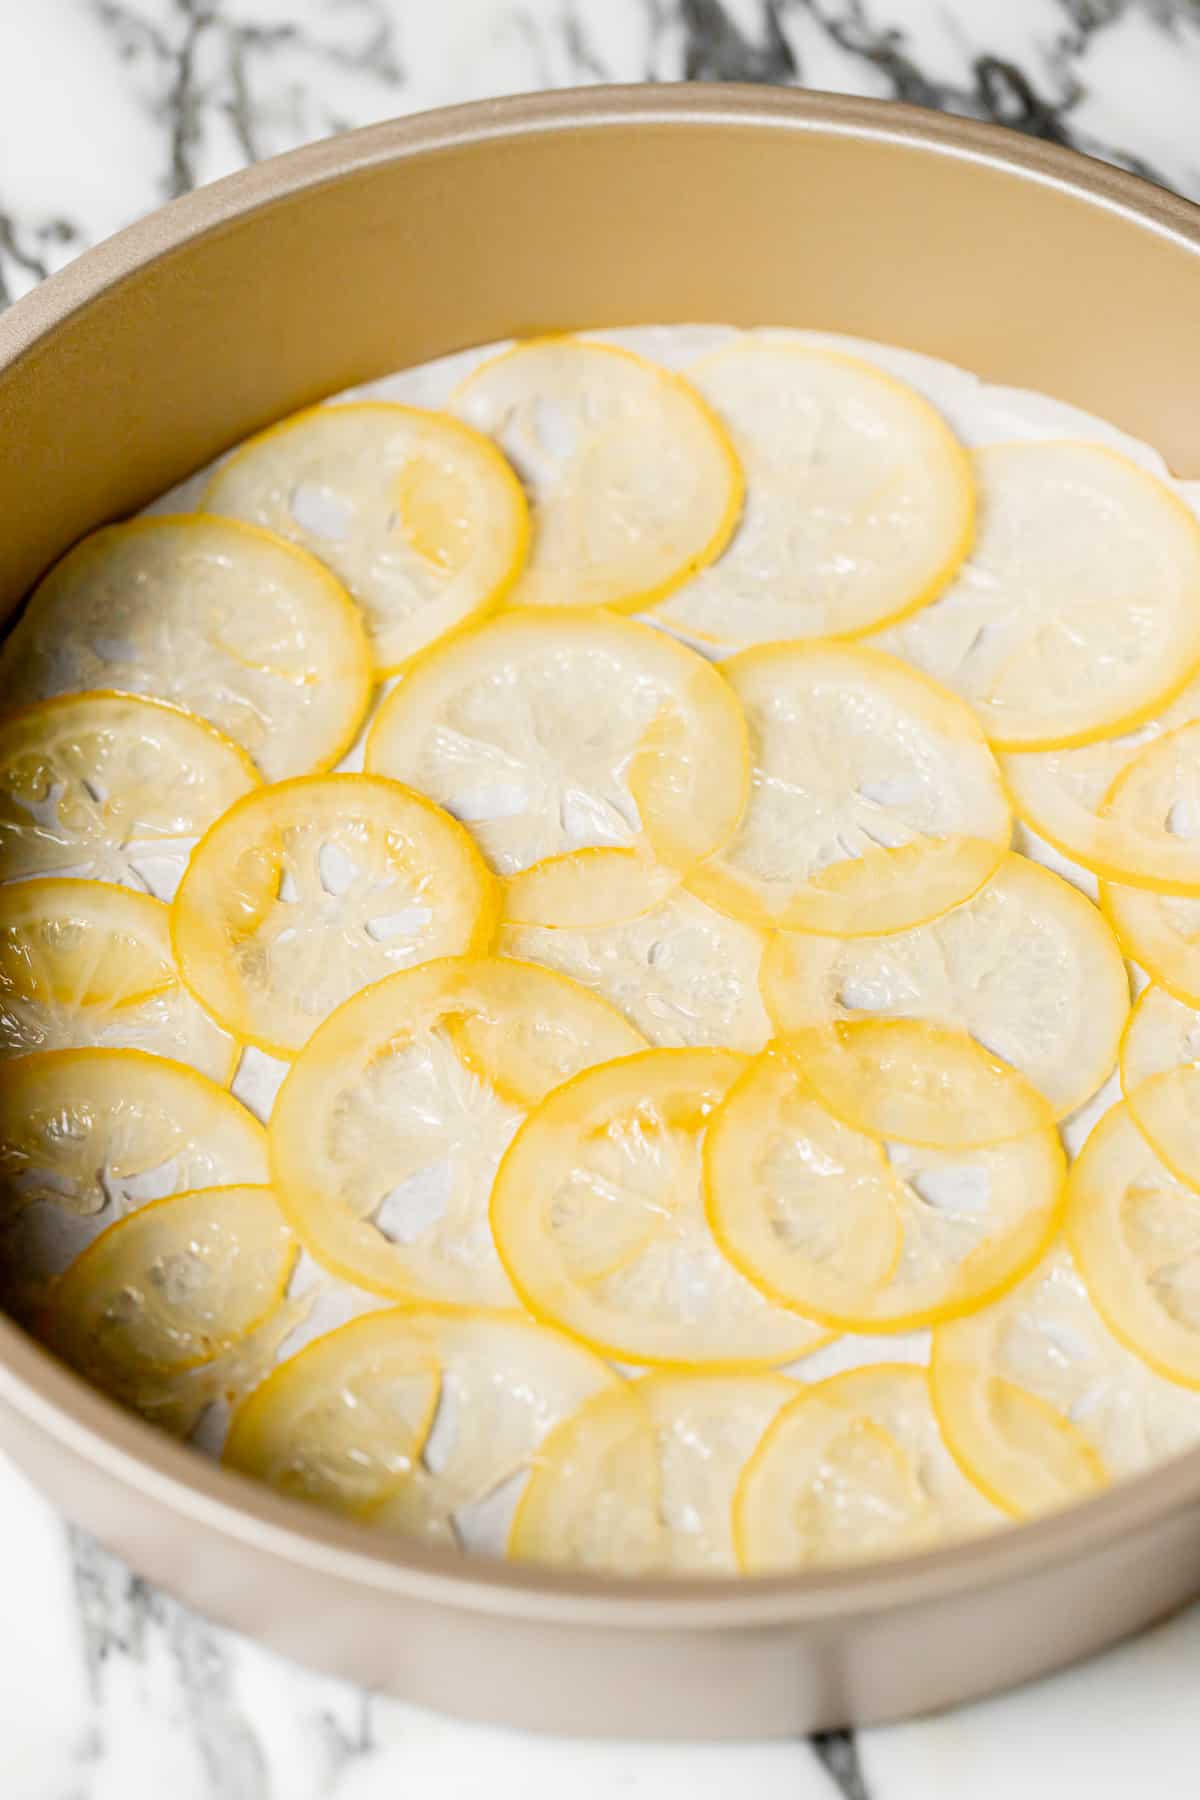 candied lemon slices arranged in cake pan.